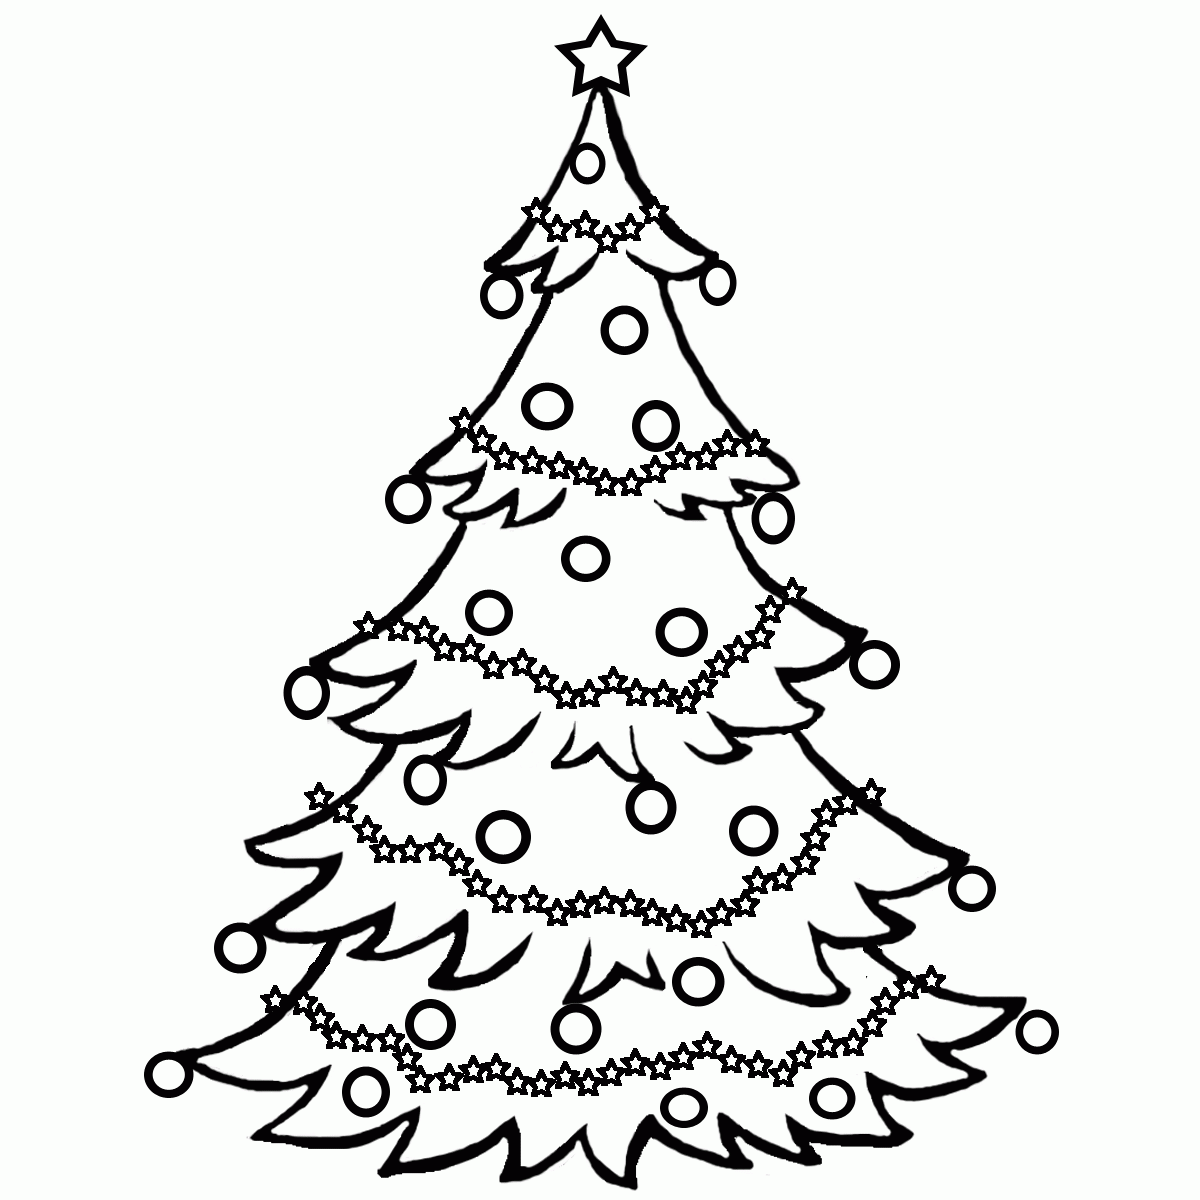 Christmas Tree Coloring Pages Free | Christmas Coloring pages of ...